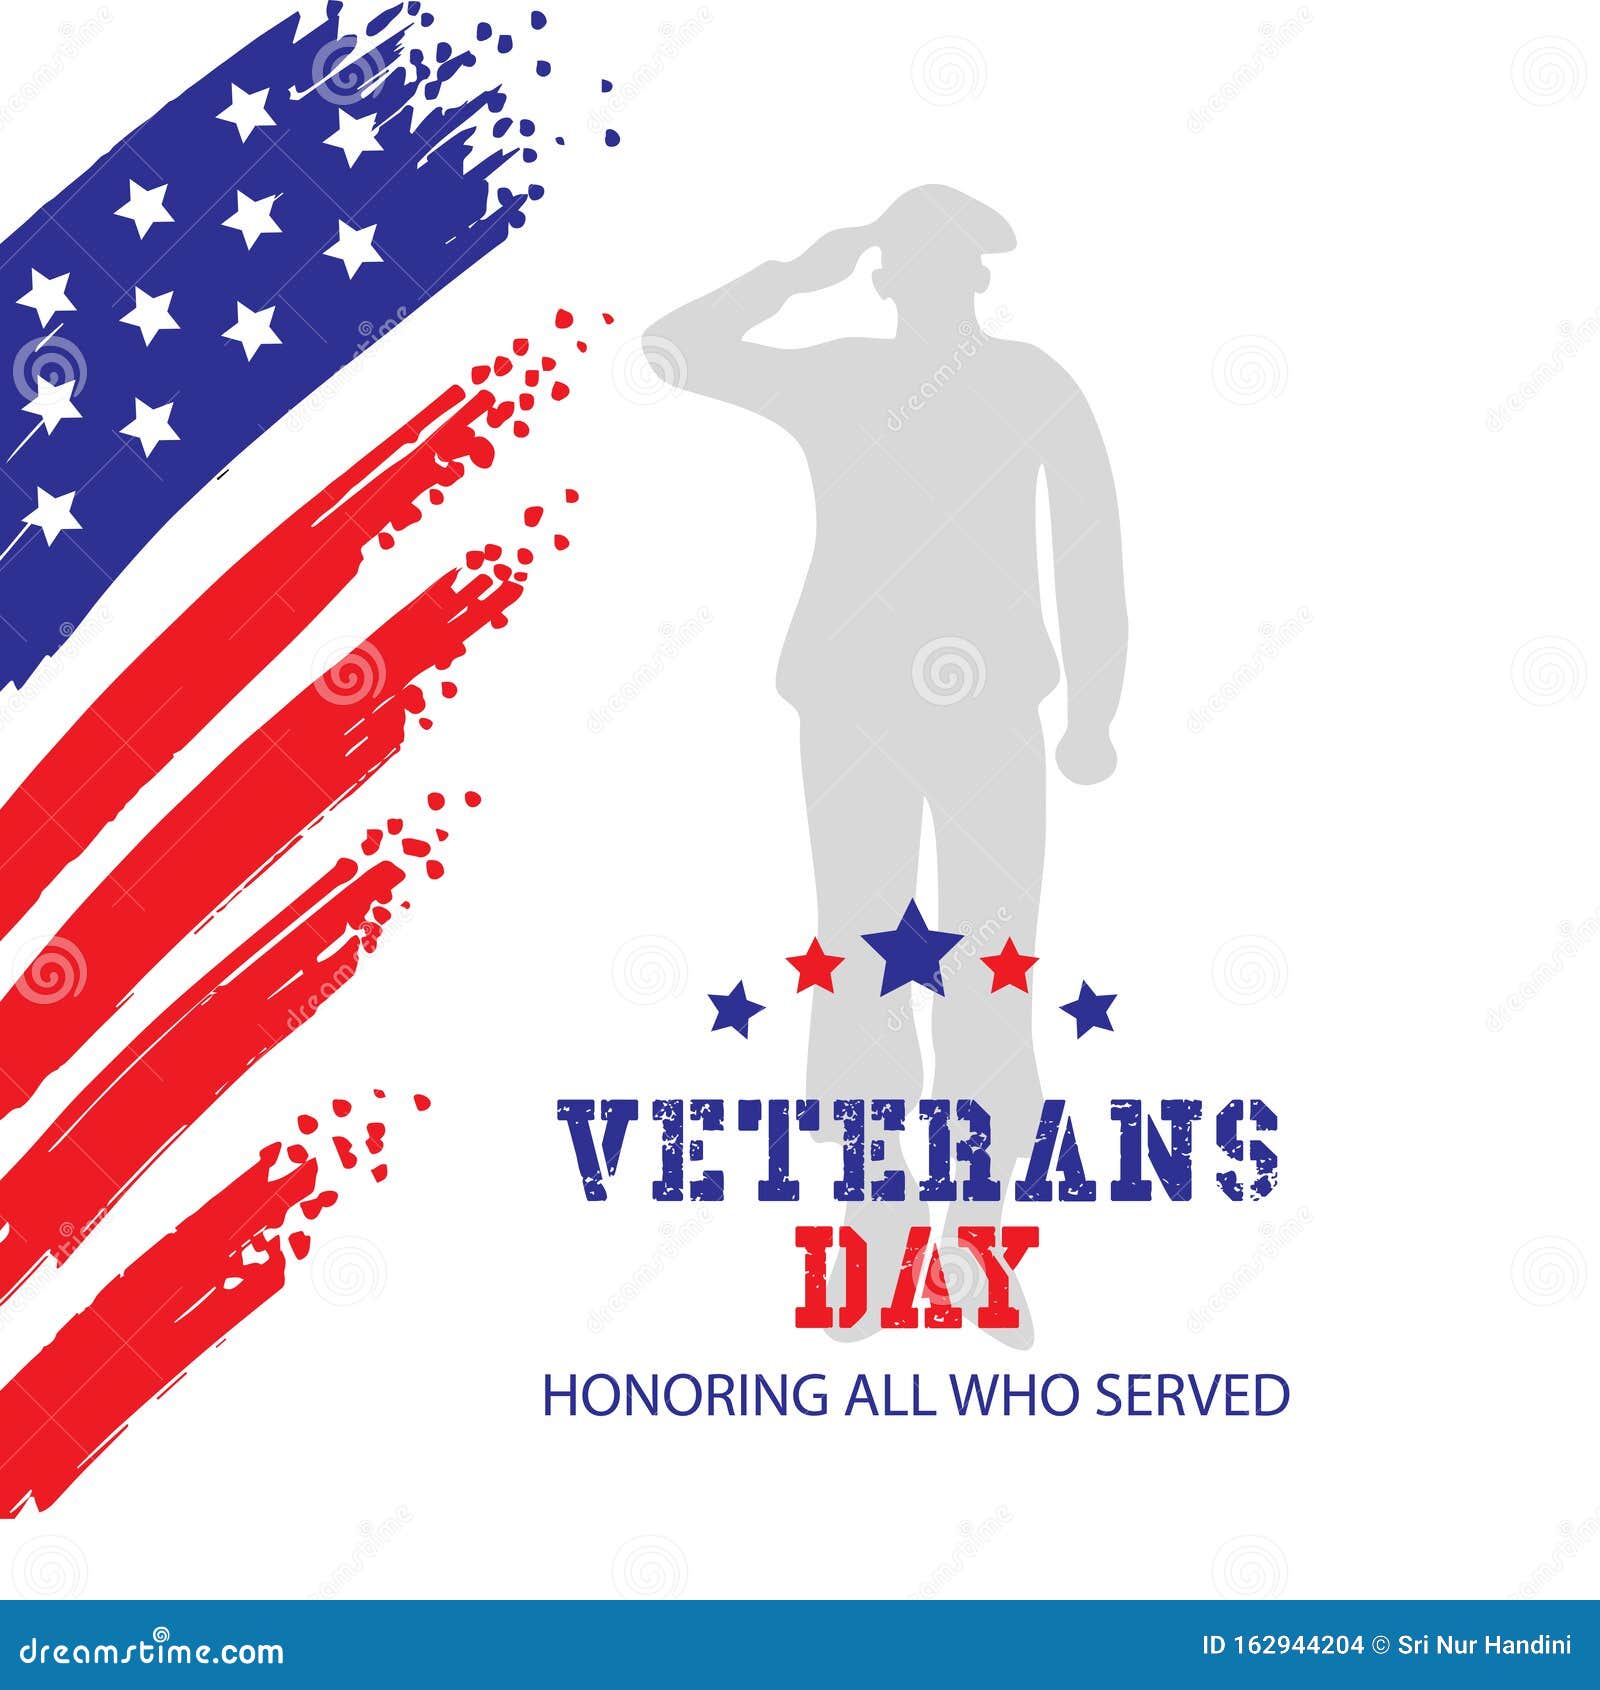 Collection 93+ Images pictures of veterans day posters Full HD, 2k, 4k